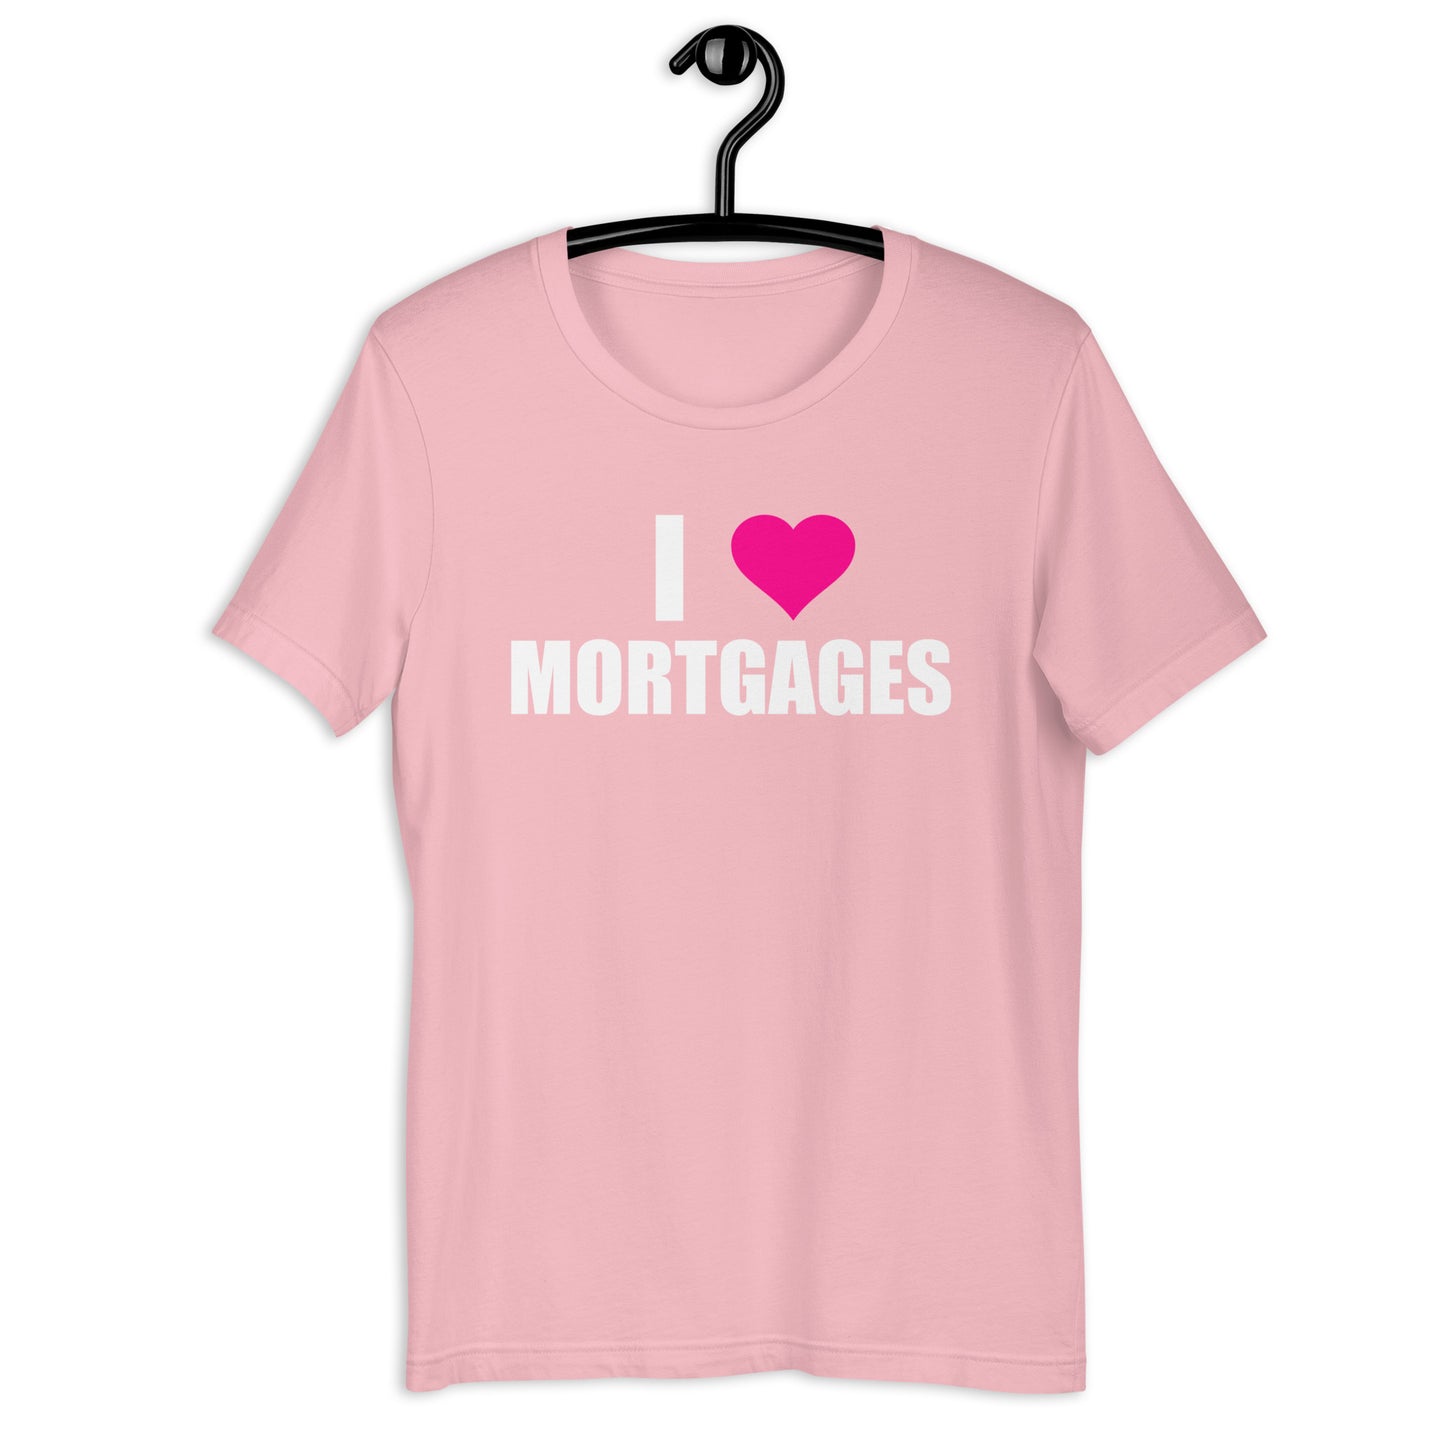 I Love Mortgages T-Shirt